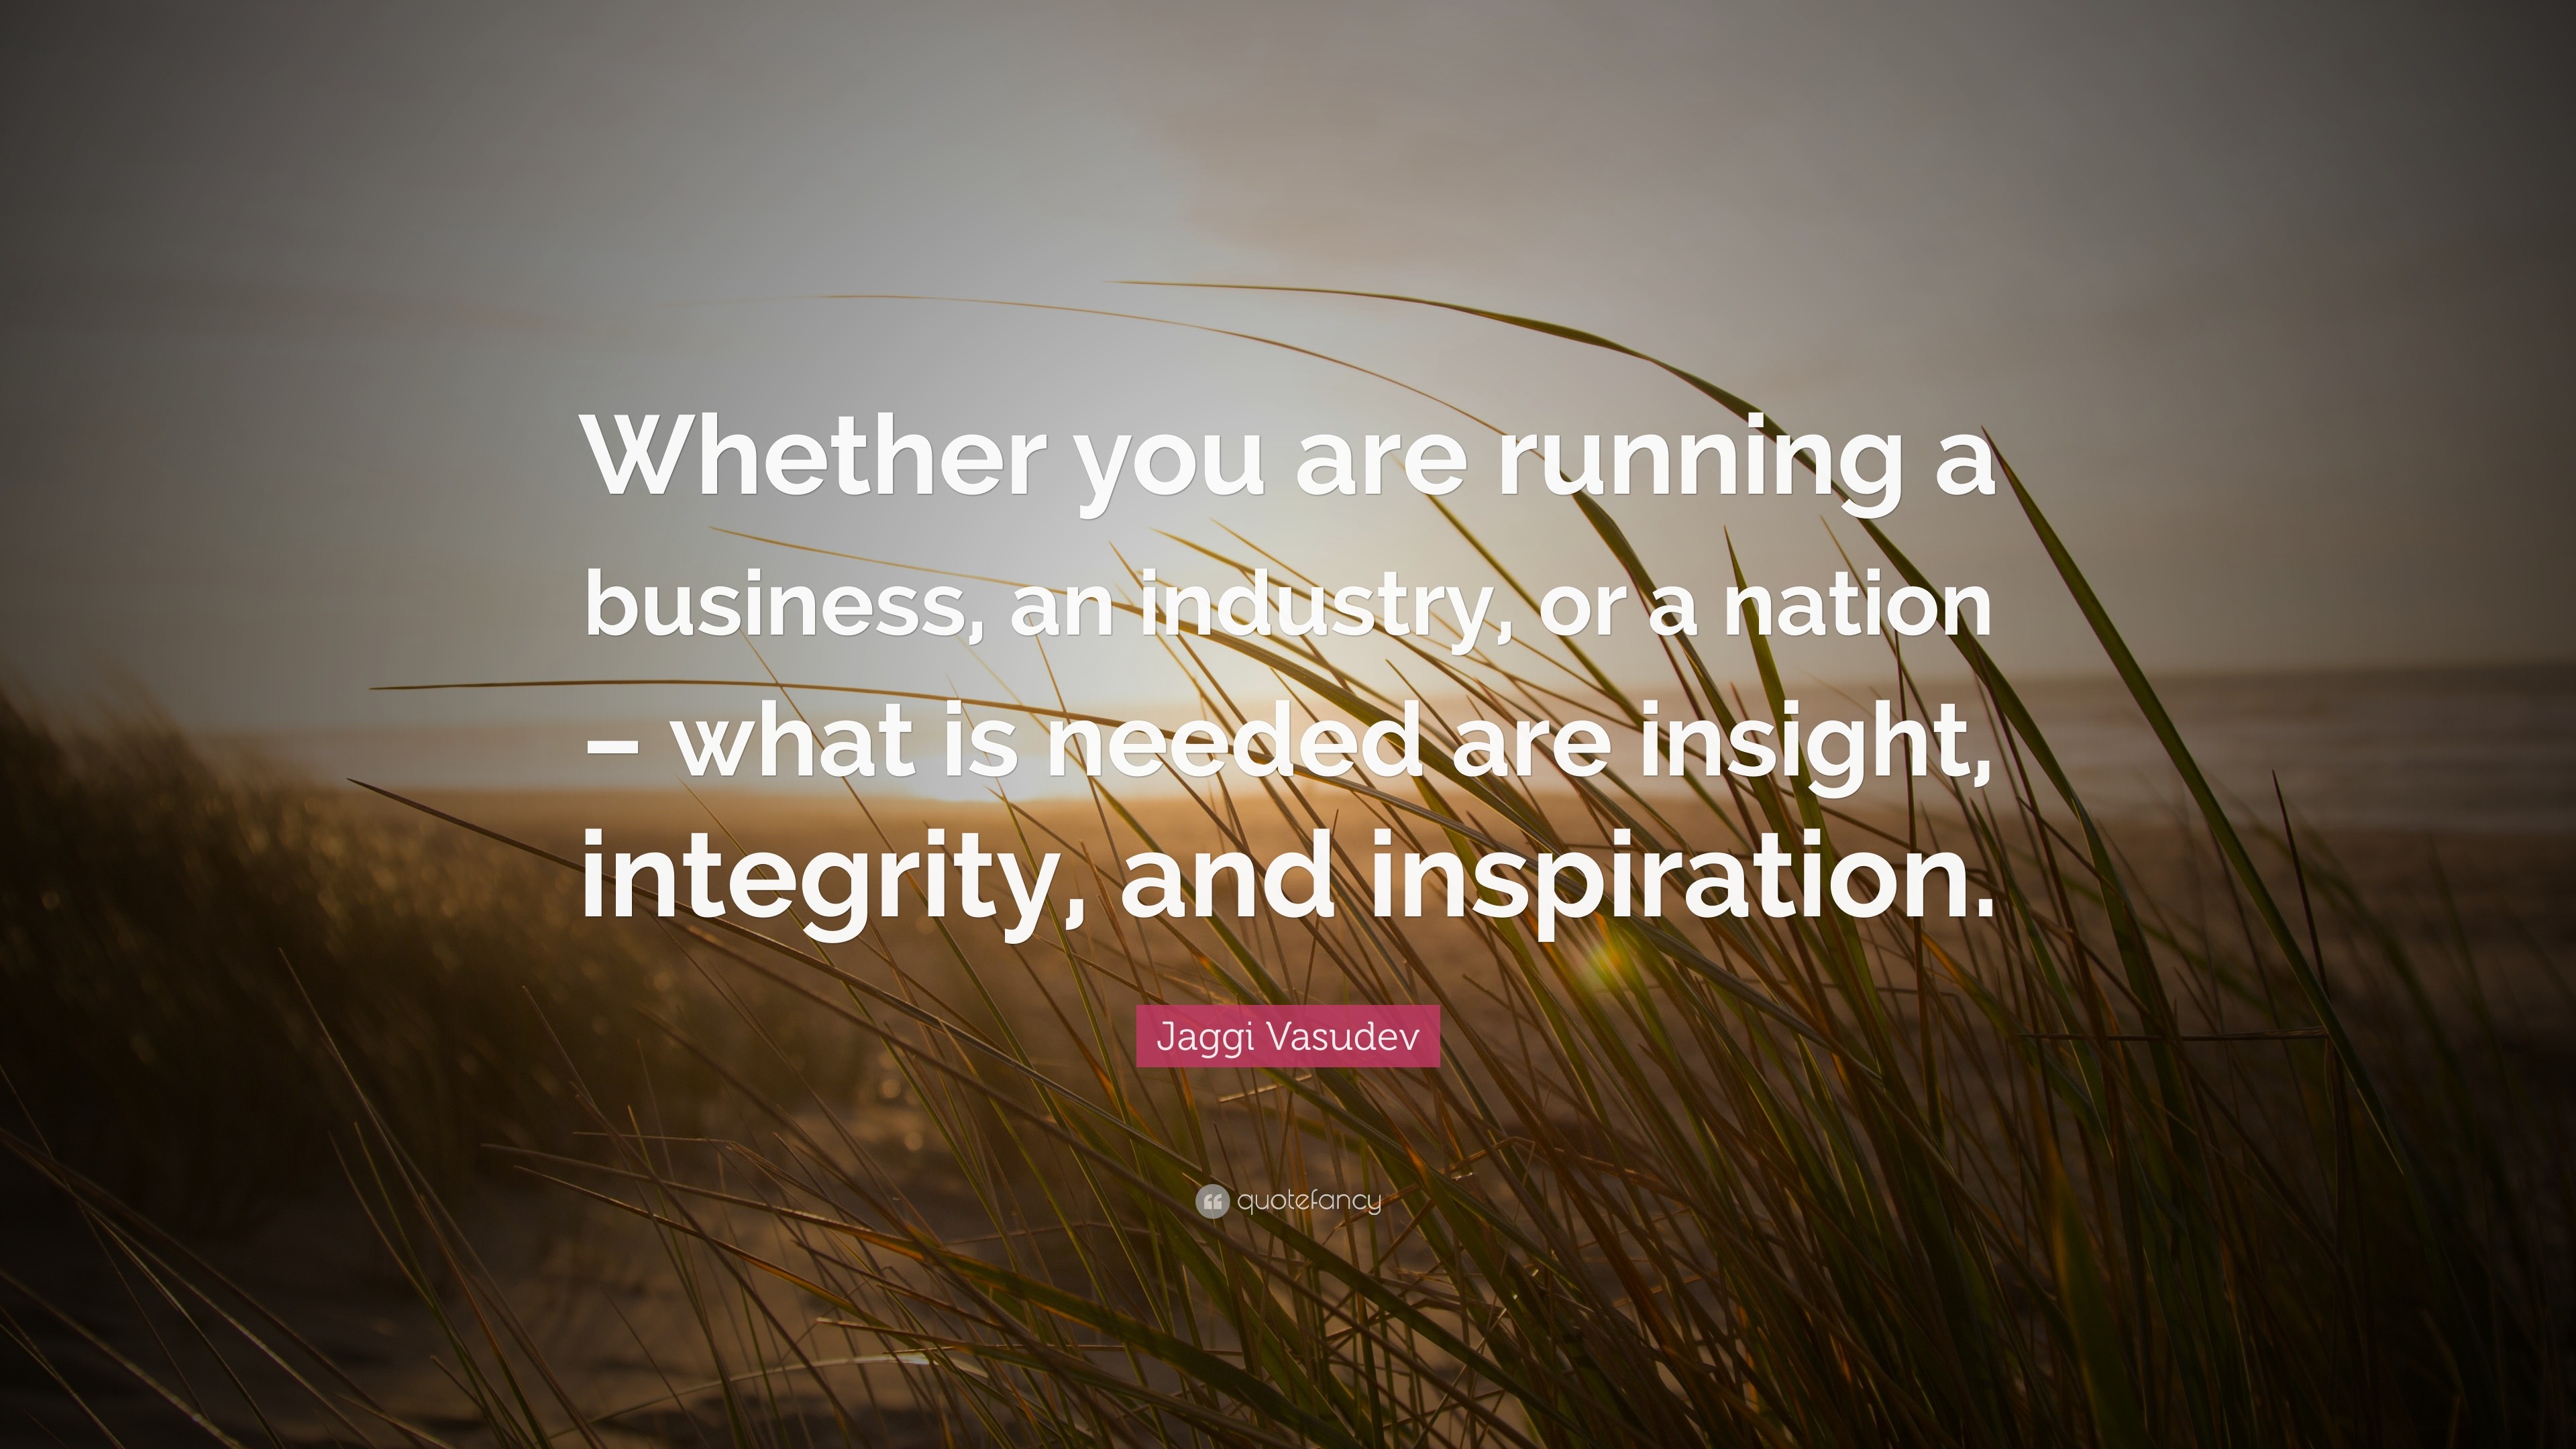 Jaggi Vasudev Quote: “Whether you are running a business, an industry, or a  nation – what is